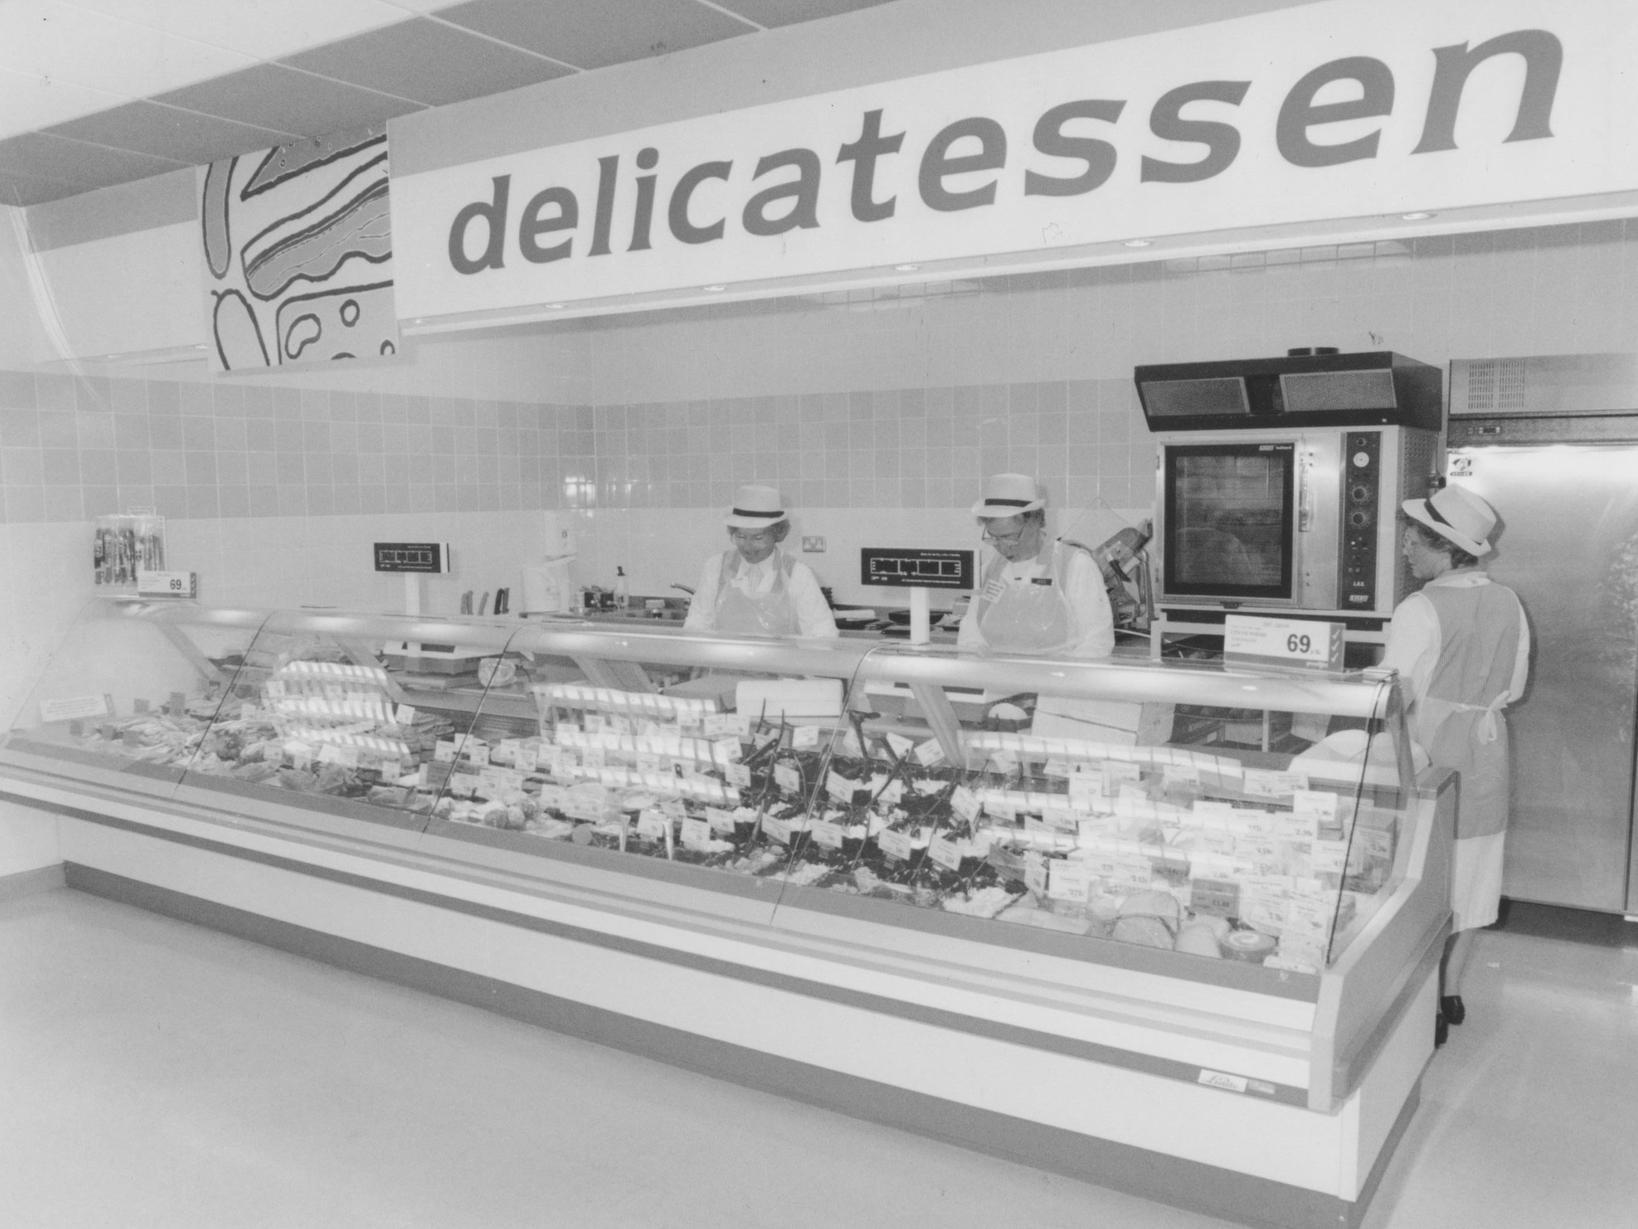 The deli at the Newby store